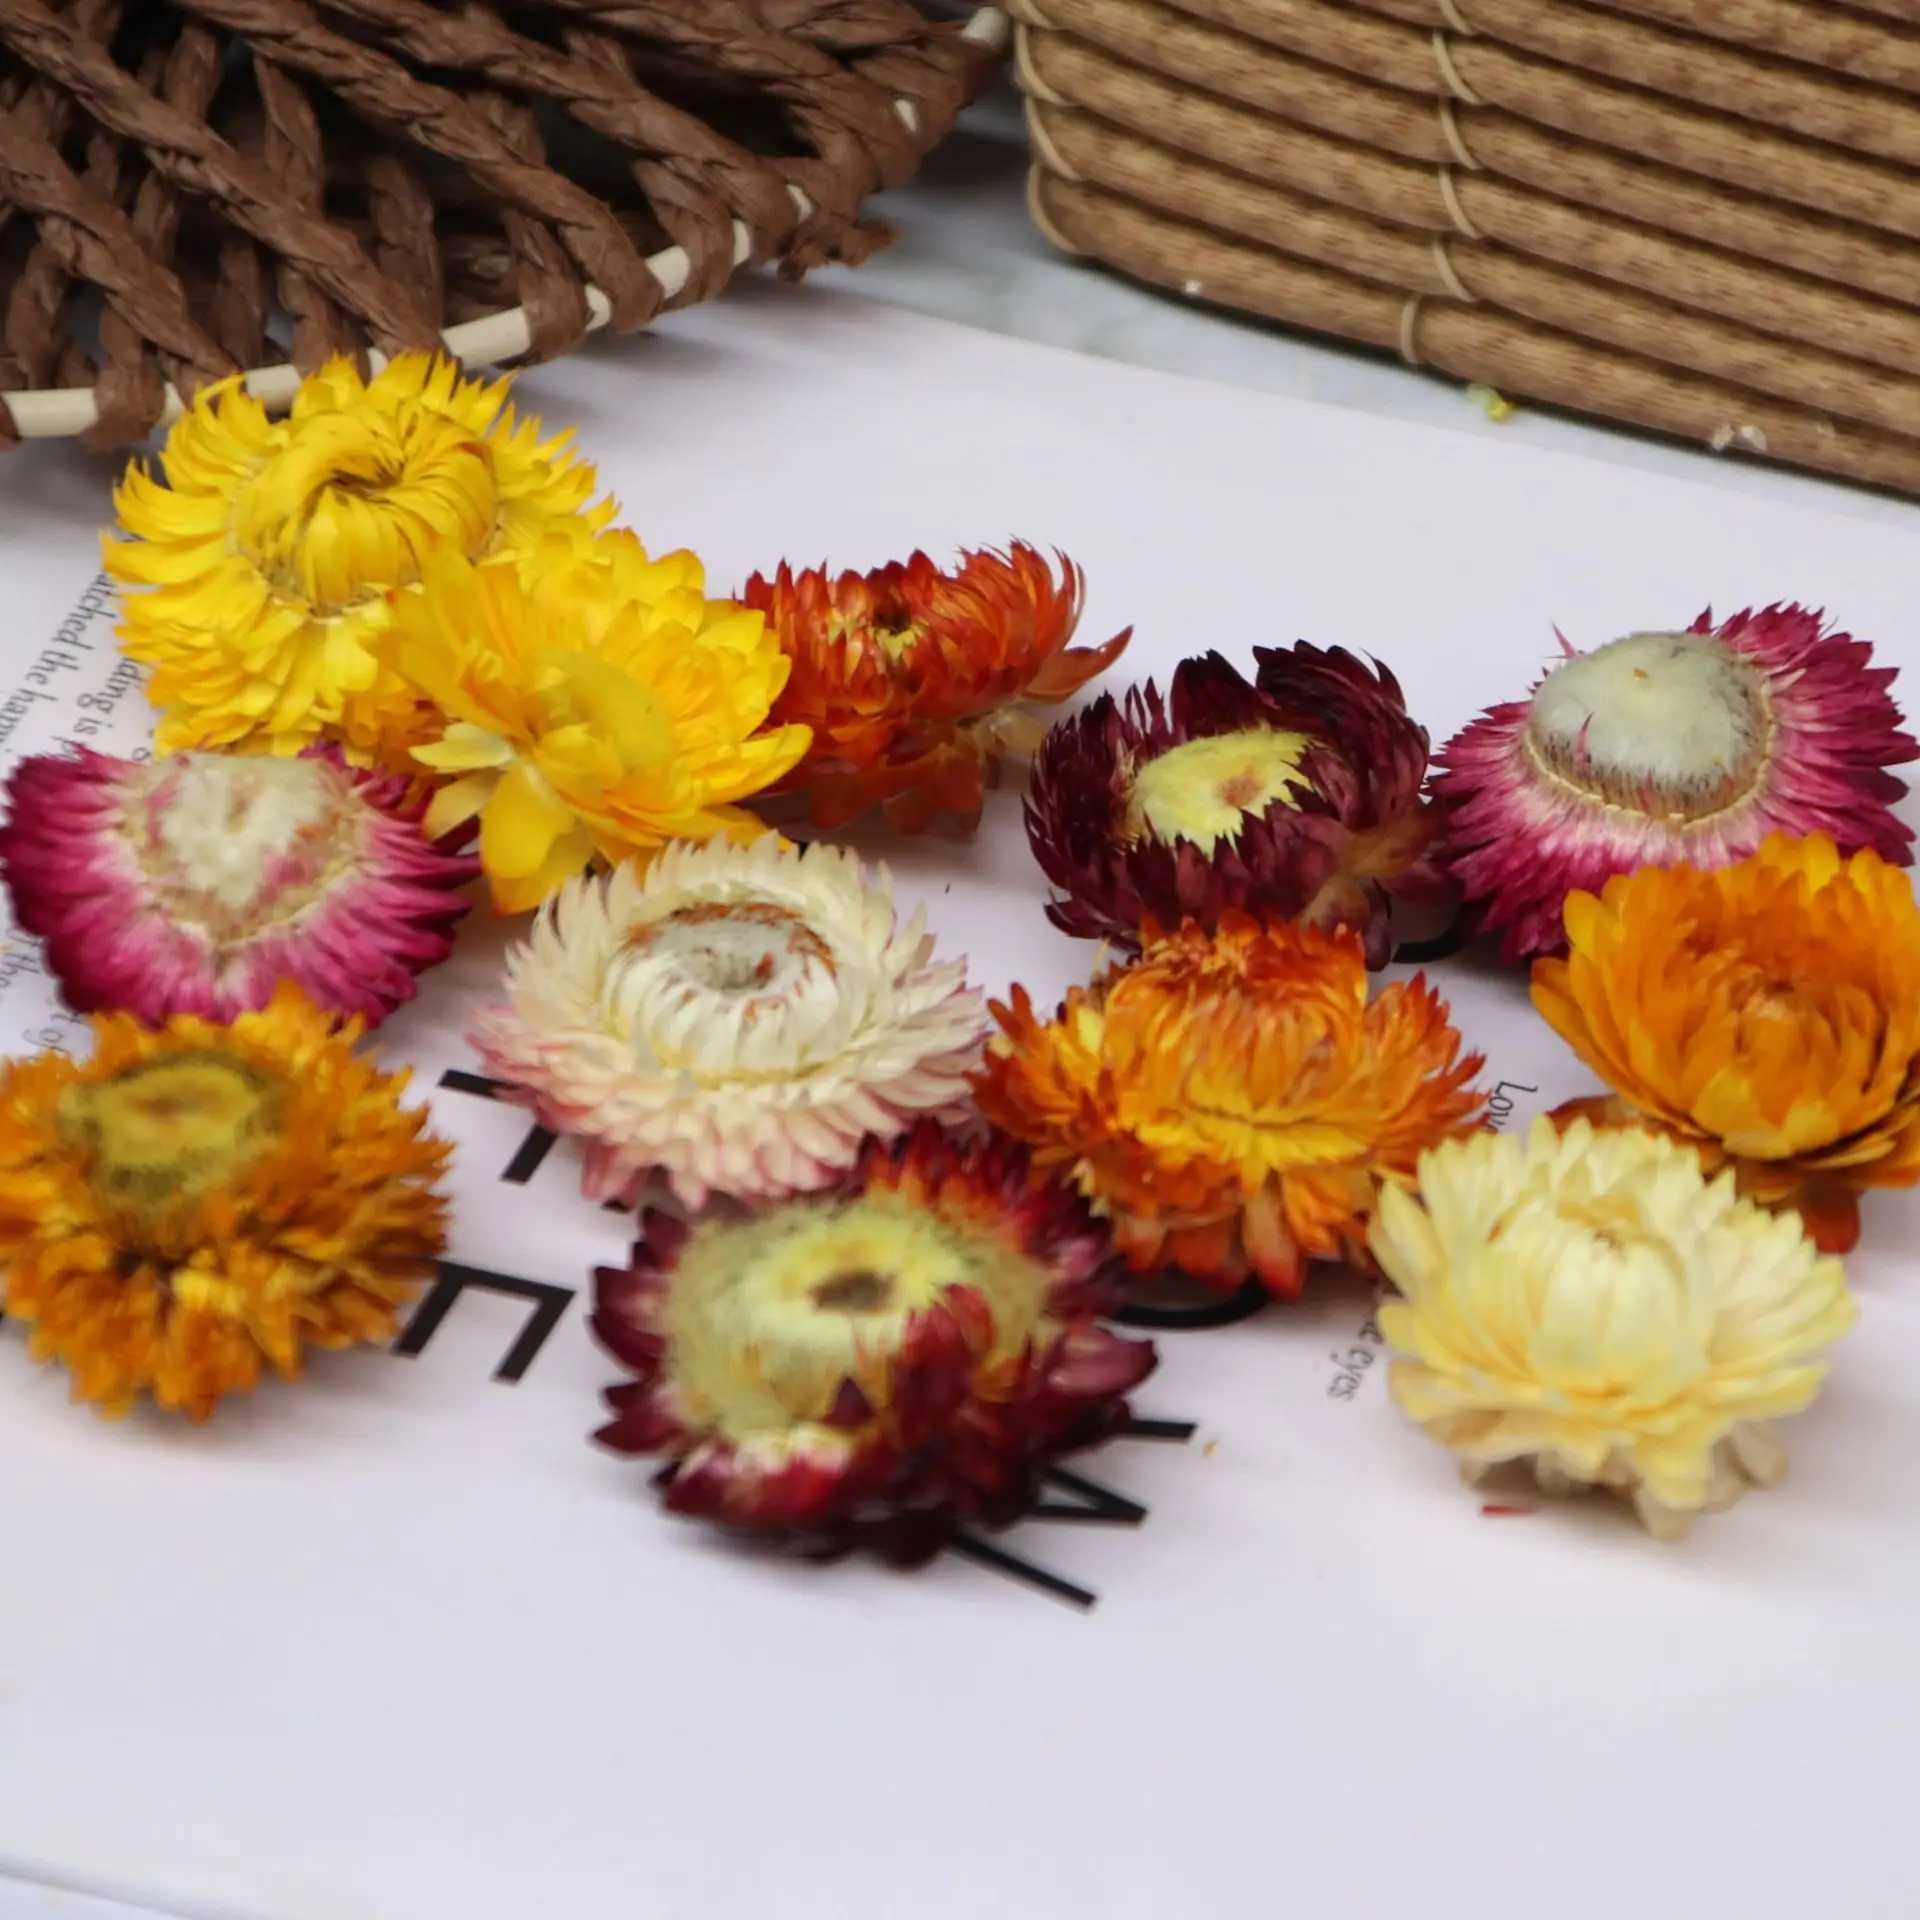 Dried Flowers Daisy Dried Natural Sunflower DIY Decor Dry Straw Chrysanthemum Heads Decorative For Home Wedding Party Tabel Decor 